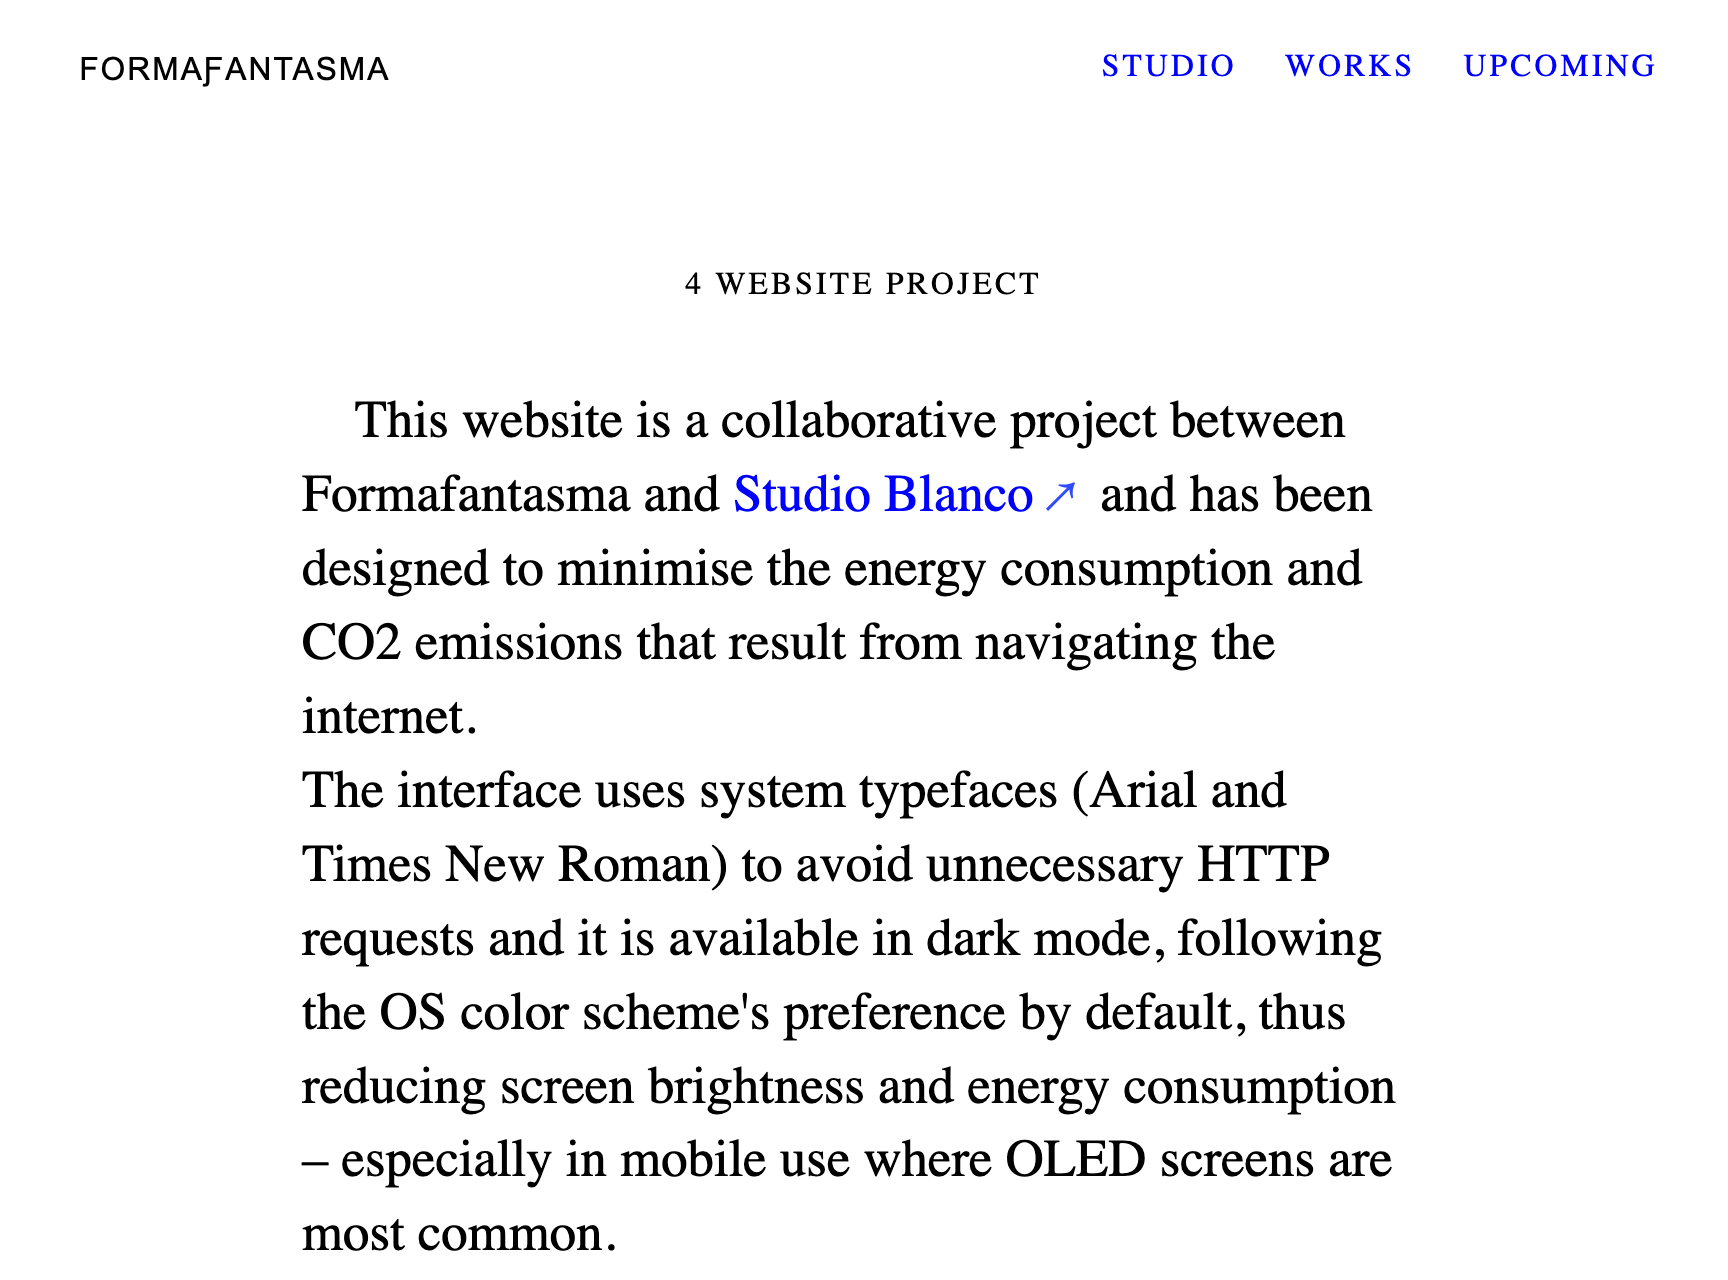 Screenshot of the Formfantasma website showing a minimal design: white background, black text set in Times New Roman, and blue links.